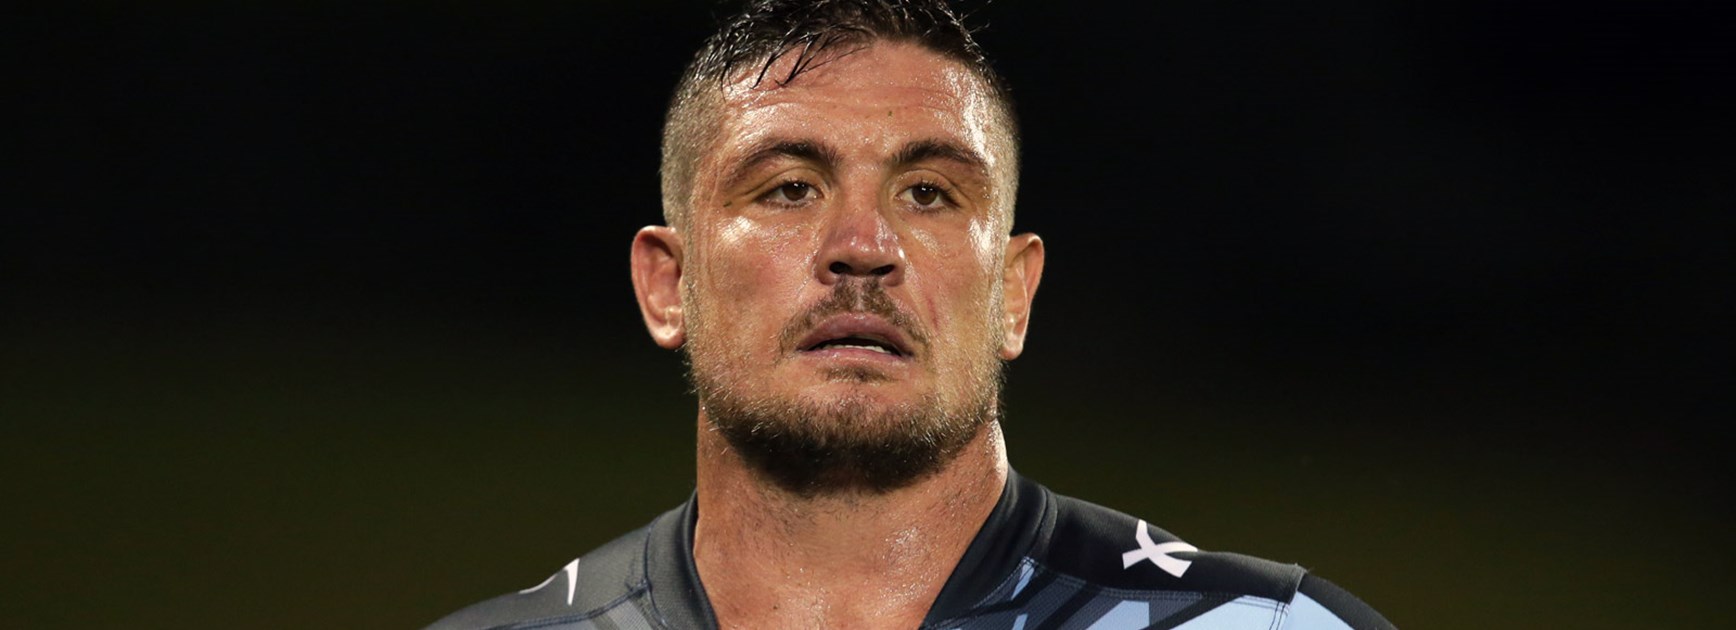 Sharks prop Chris Heighington was one of three players charged so far in Round 1.